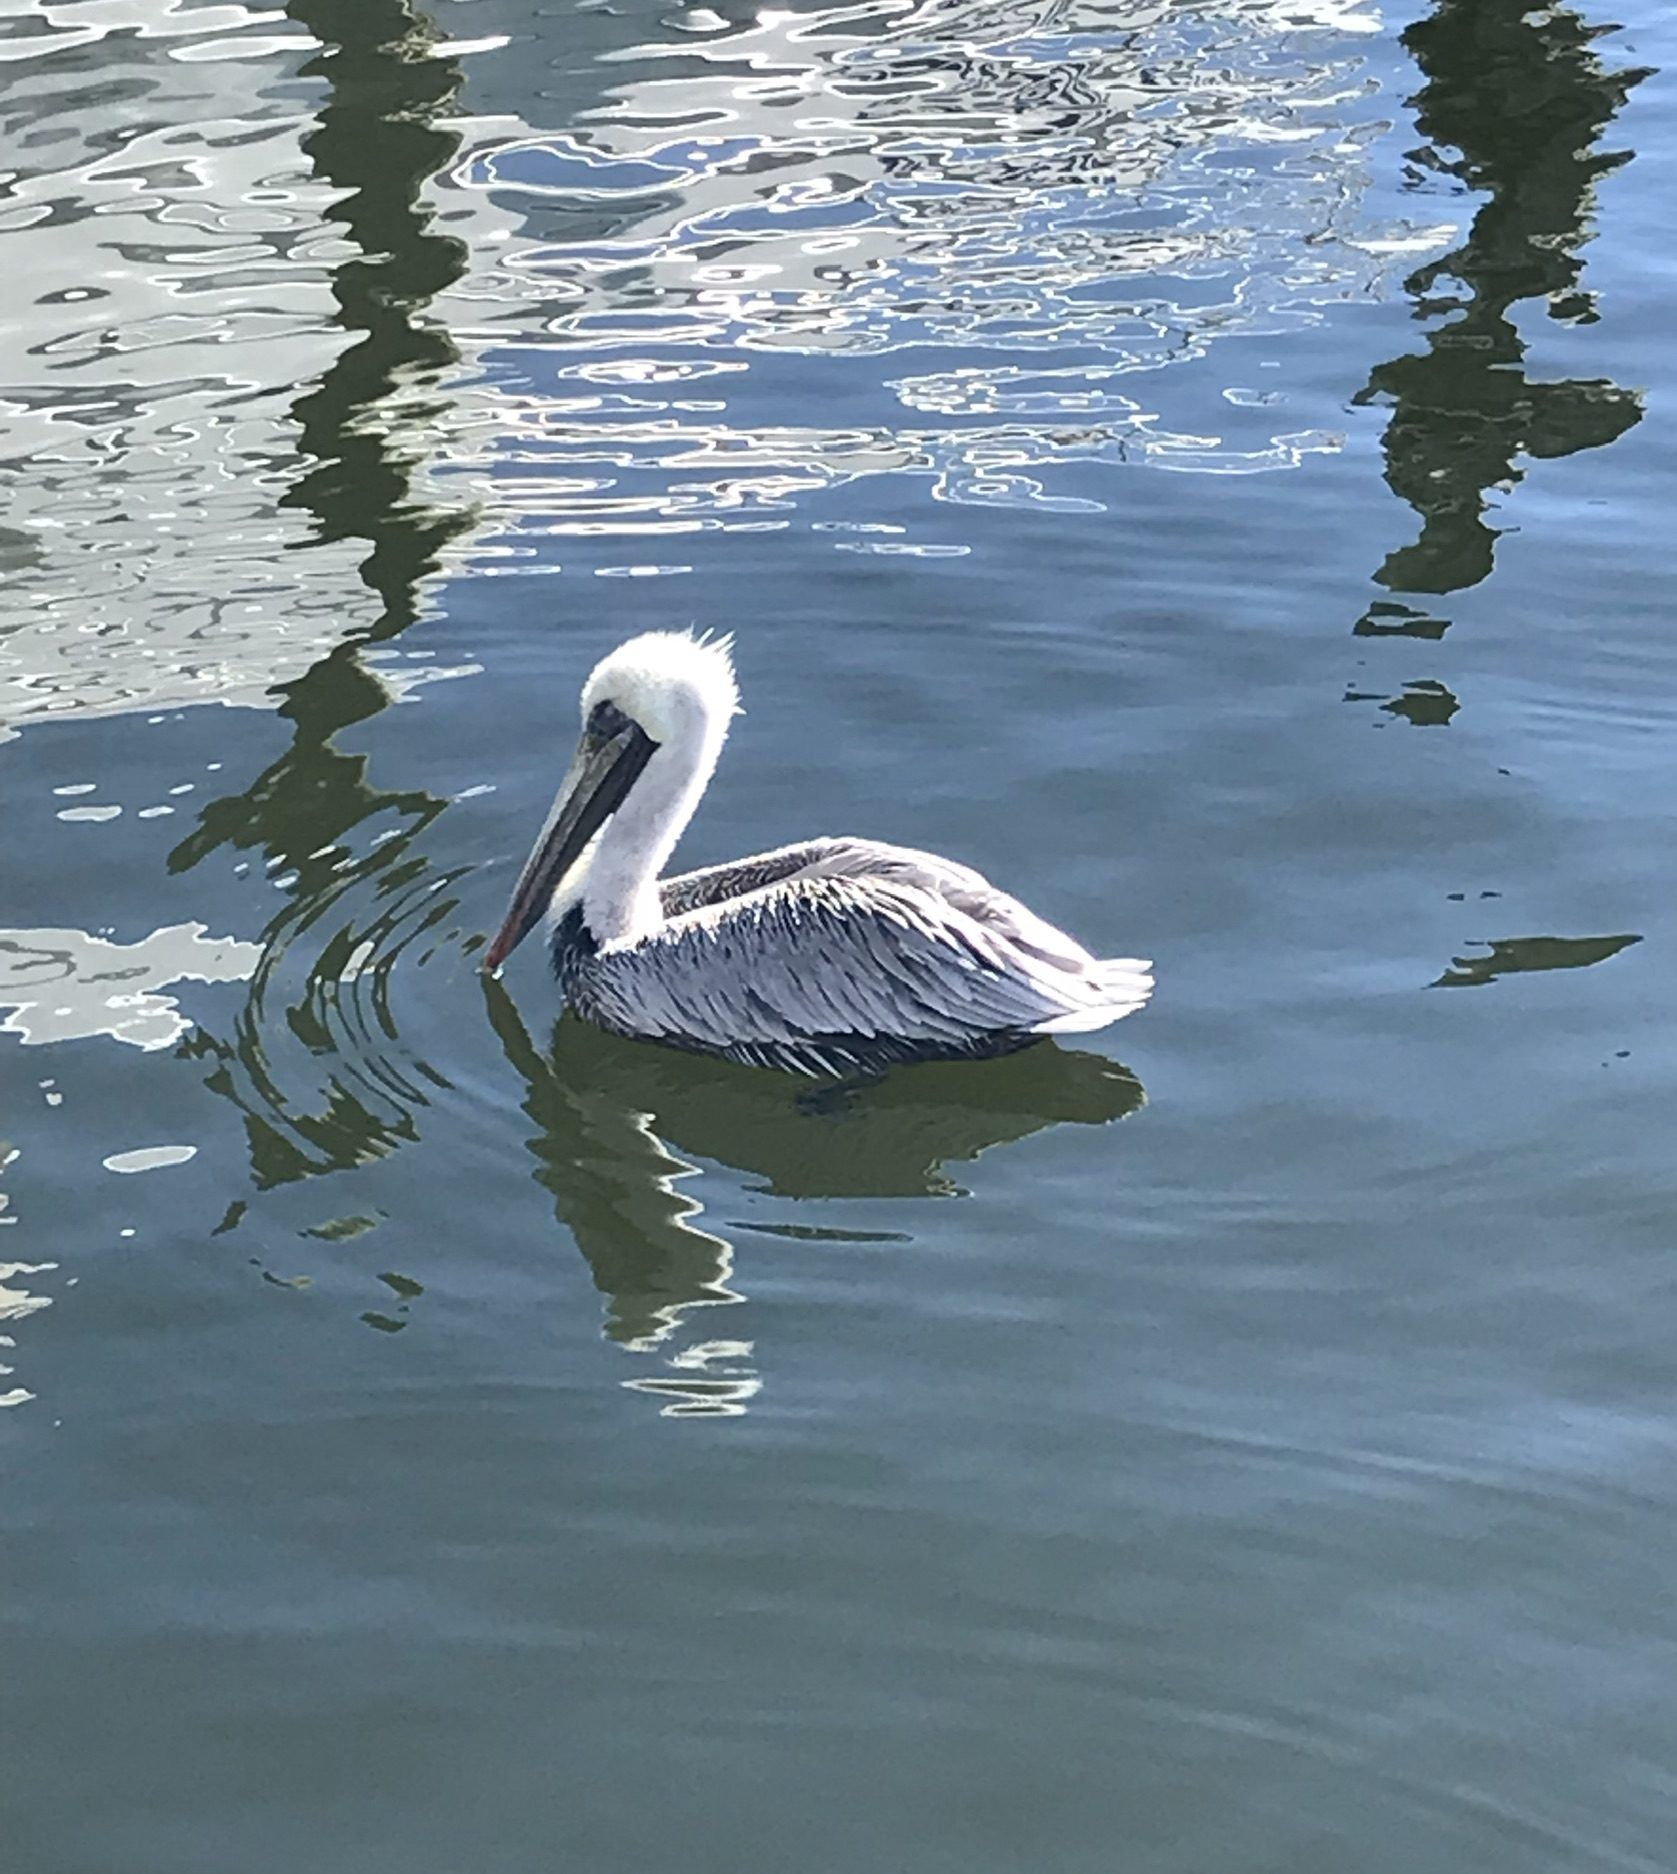 Today's Photo of the Day comes from Gerry Barnes. Jerry took this photo on Nov. 2, 2021 at Harbor Walk Marina in Destin. 

"I am fascinated by pelicans," Gerry said.